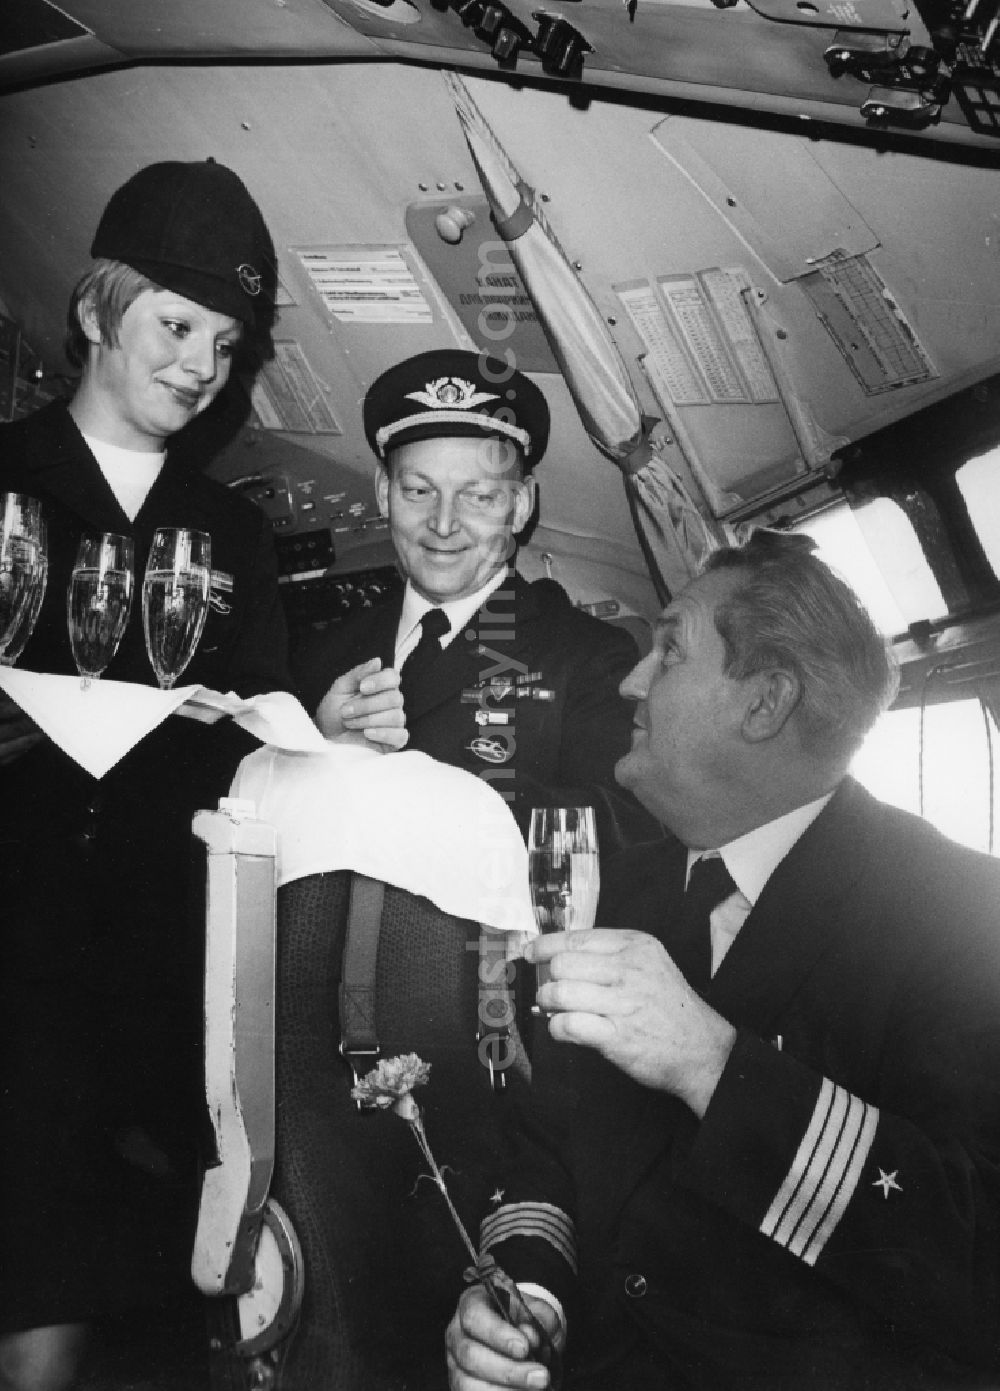 Moskau: Small drink in the cockpit of an IL-18 with the captain of the INTERFLUG Prof. Dr.-Ing. Rolf Heinig (1924 - 20